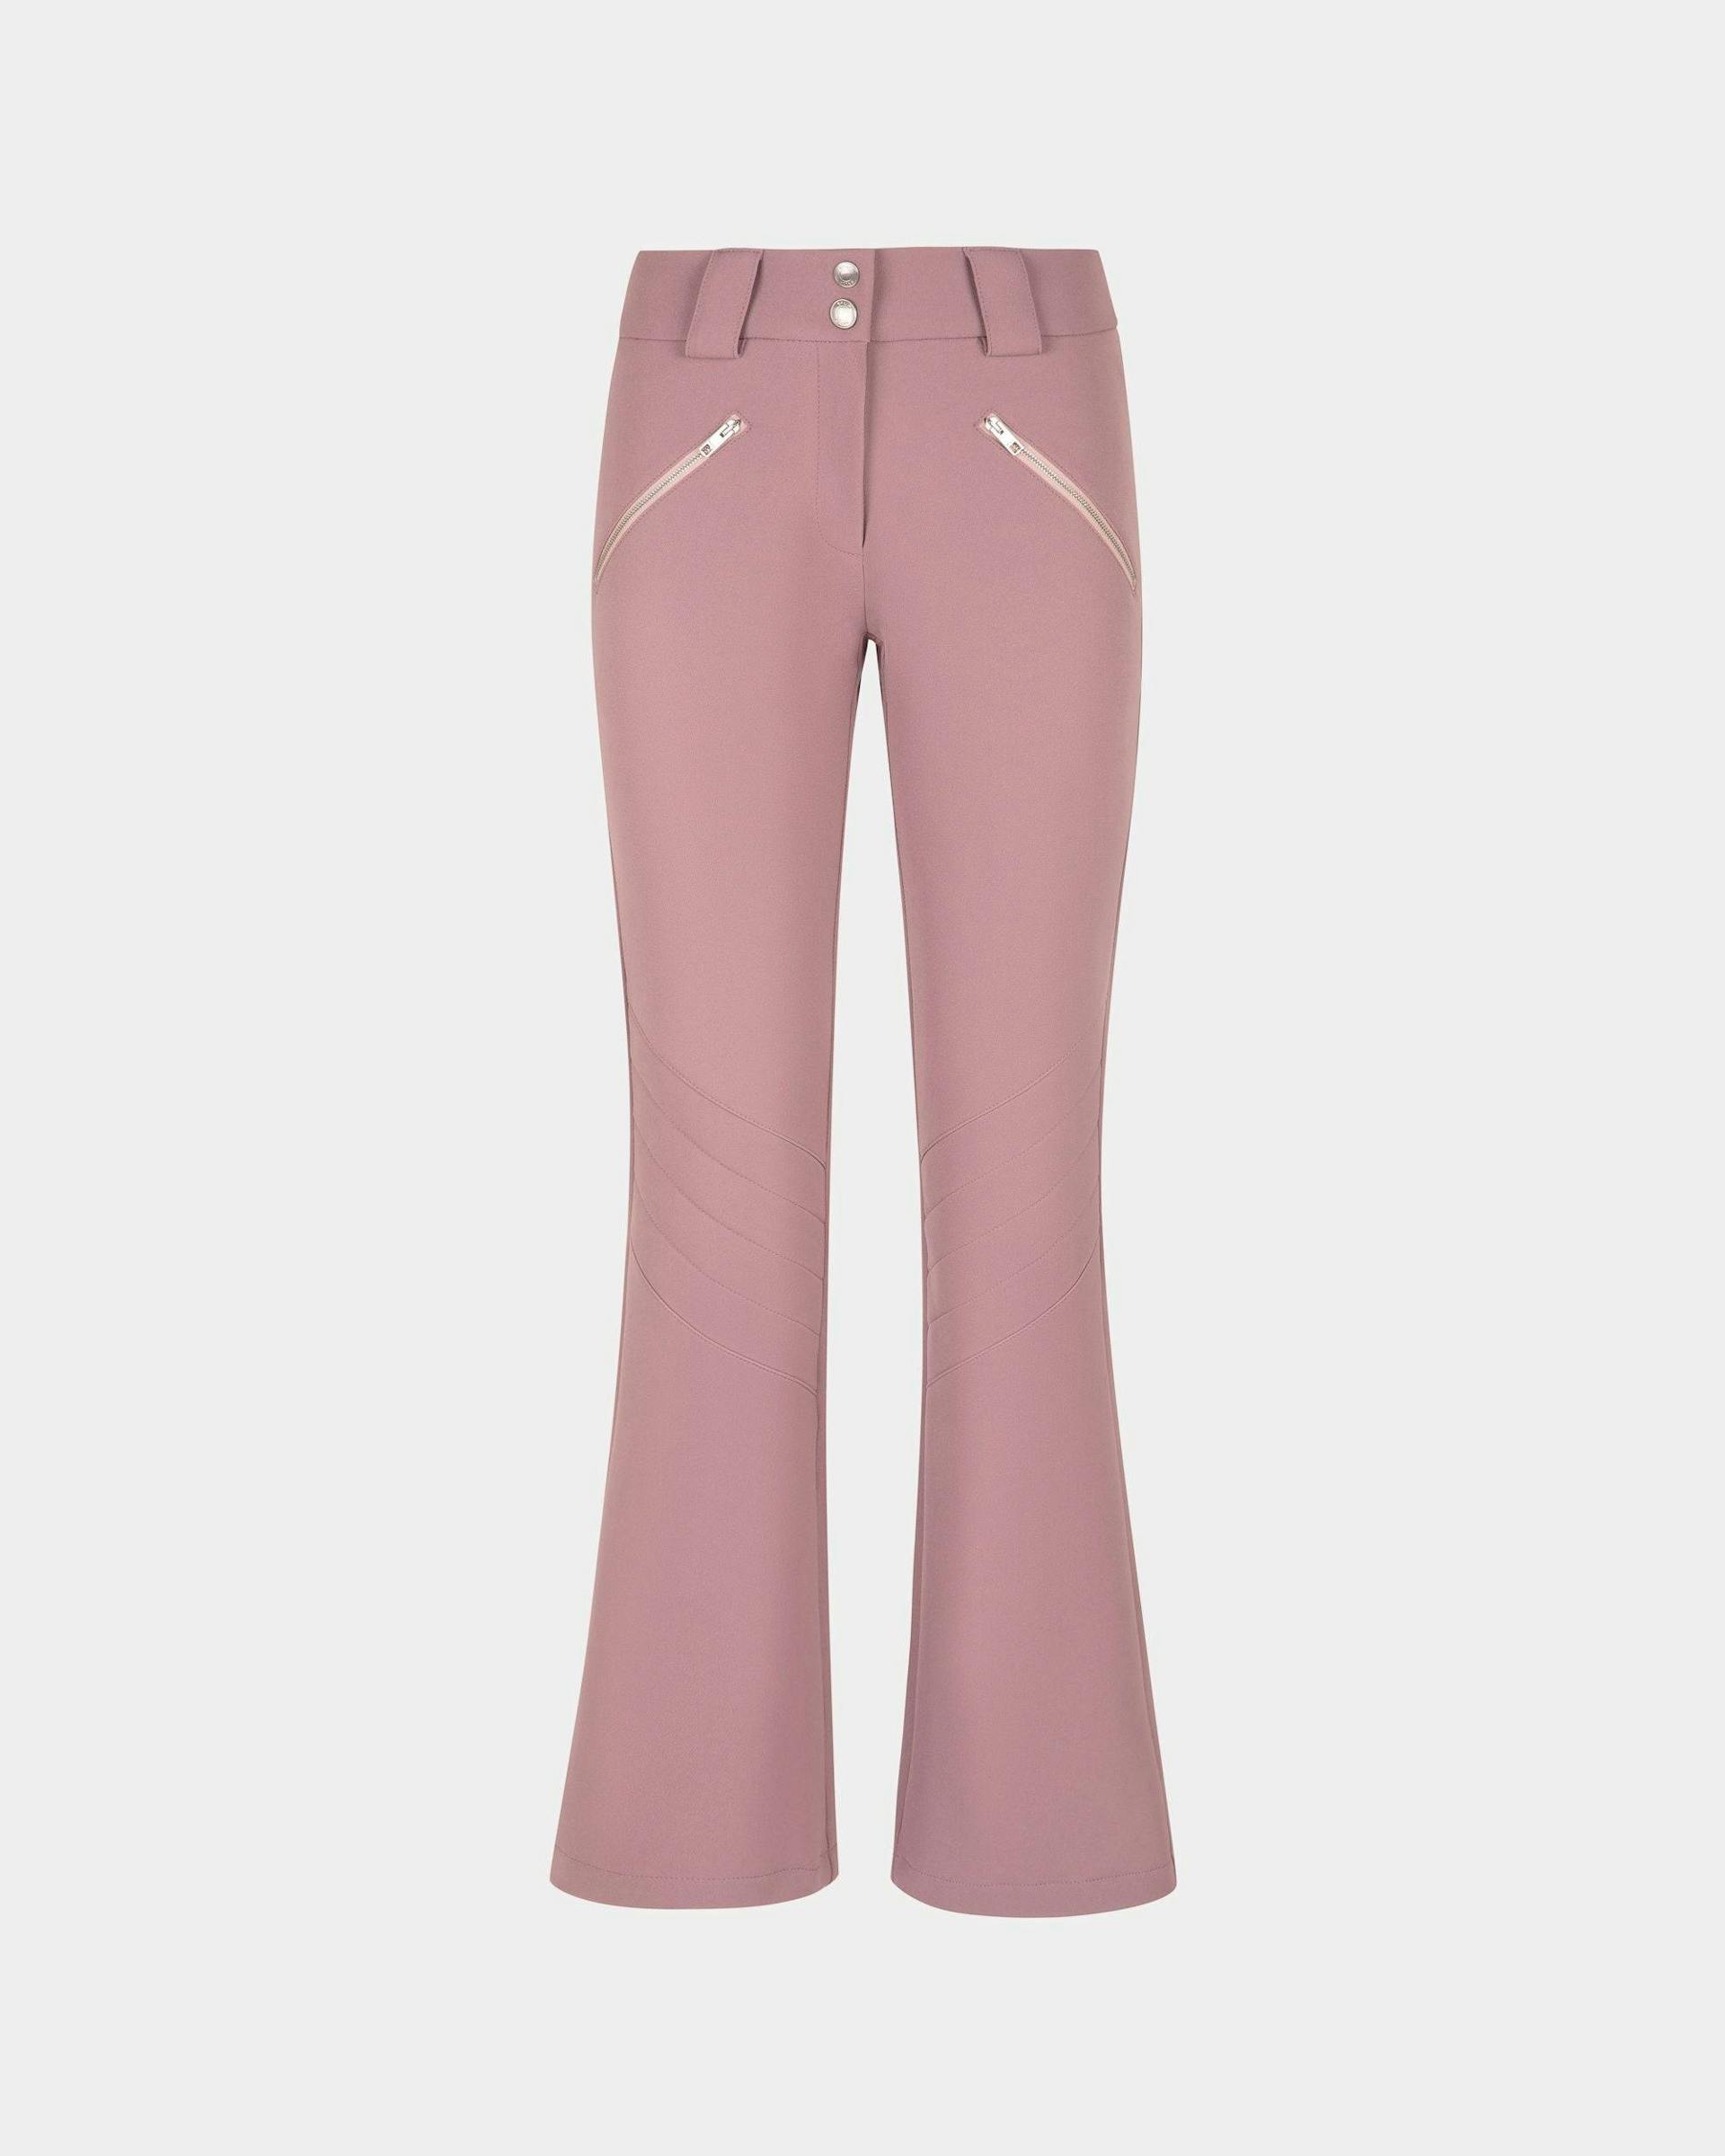 Women's Flared Stretch Pants In Light Pink | Bally | Still Life Front